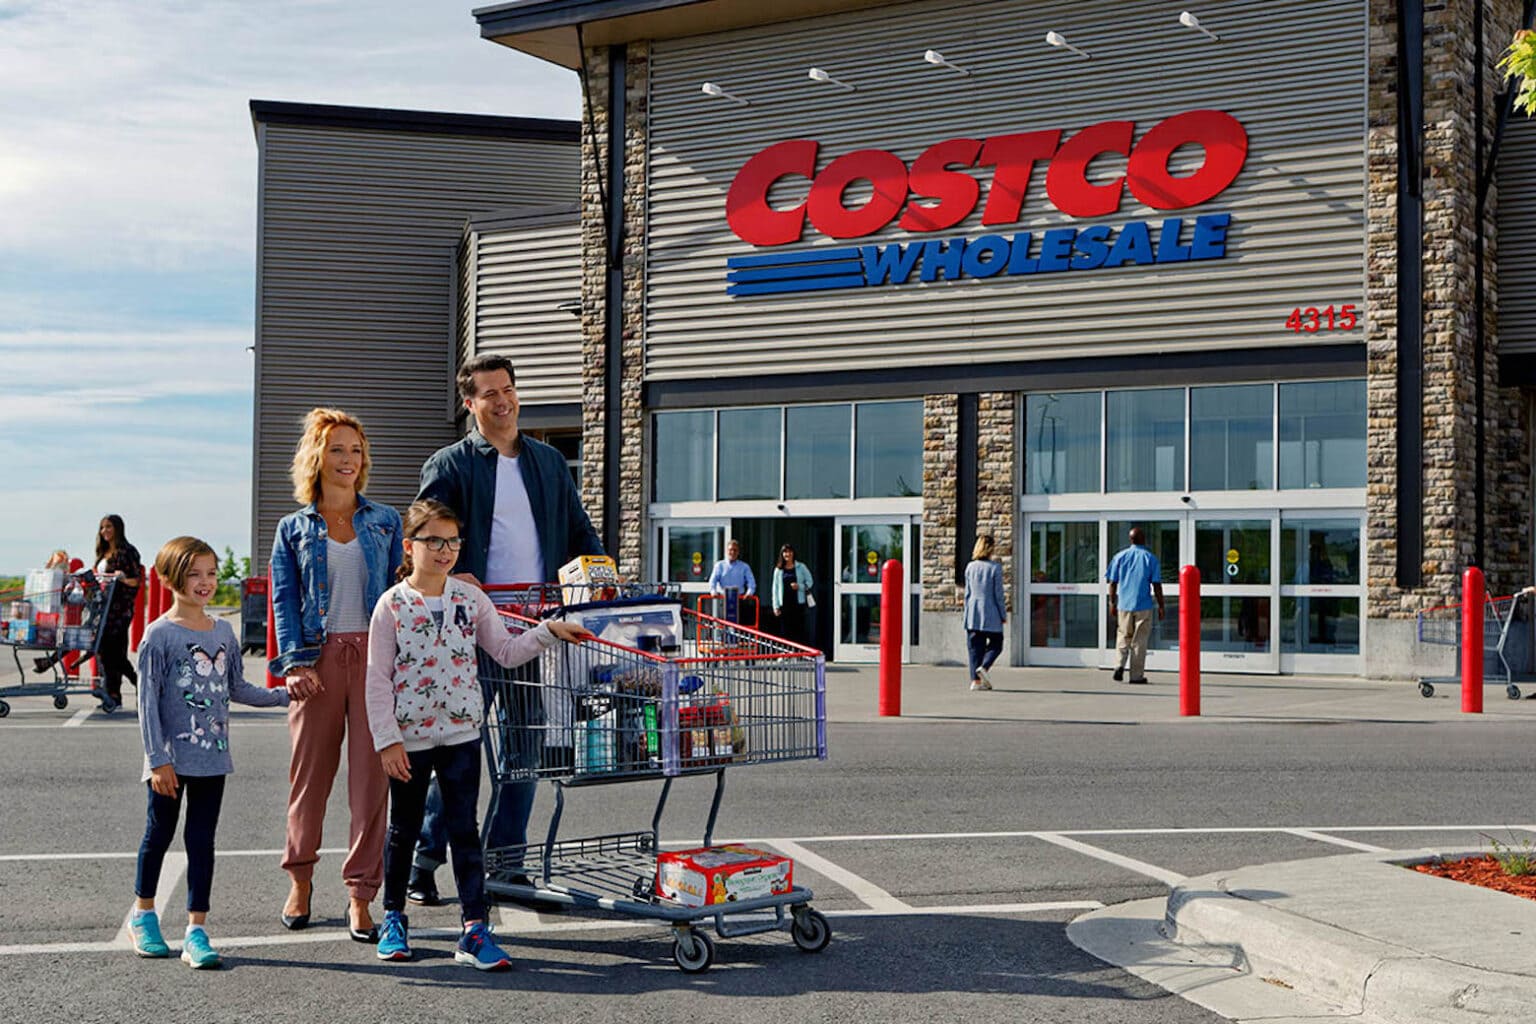 Grab a one-year membership at Costco and $30 Digital Shop Card* for only $60.